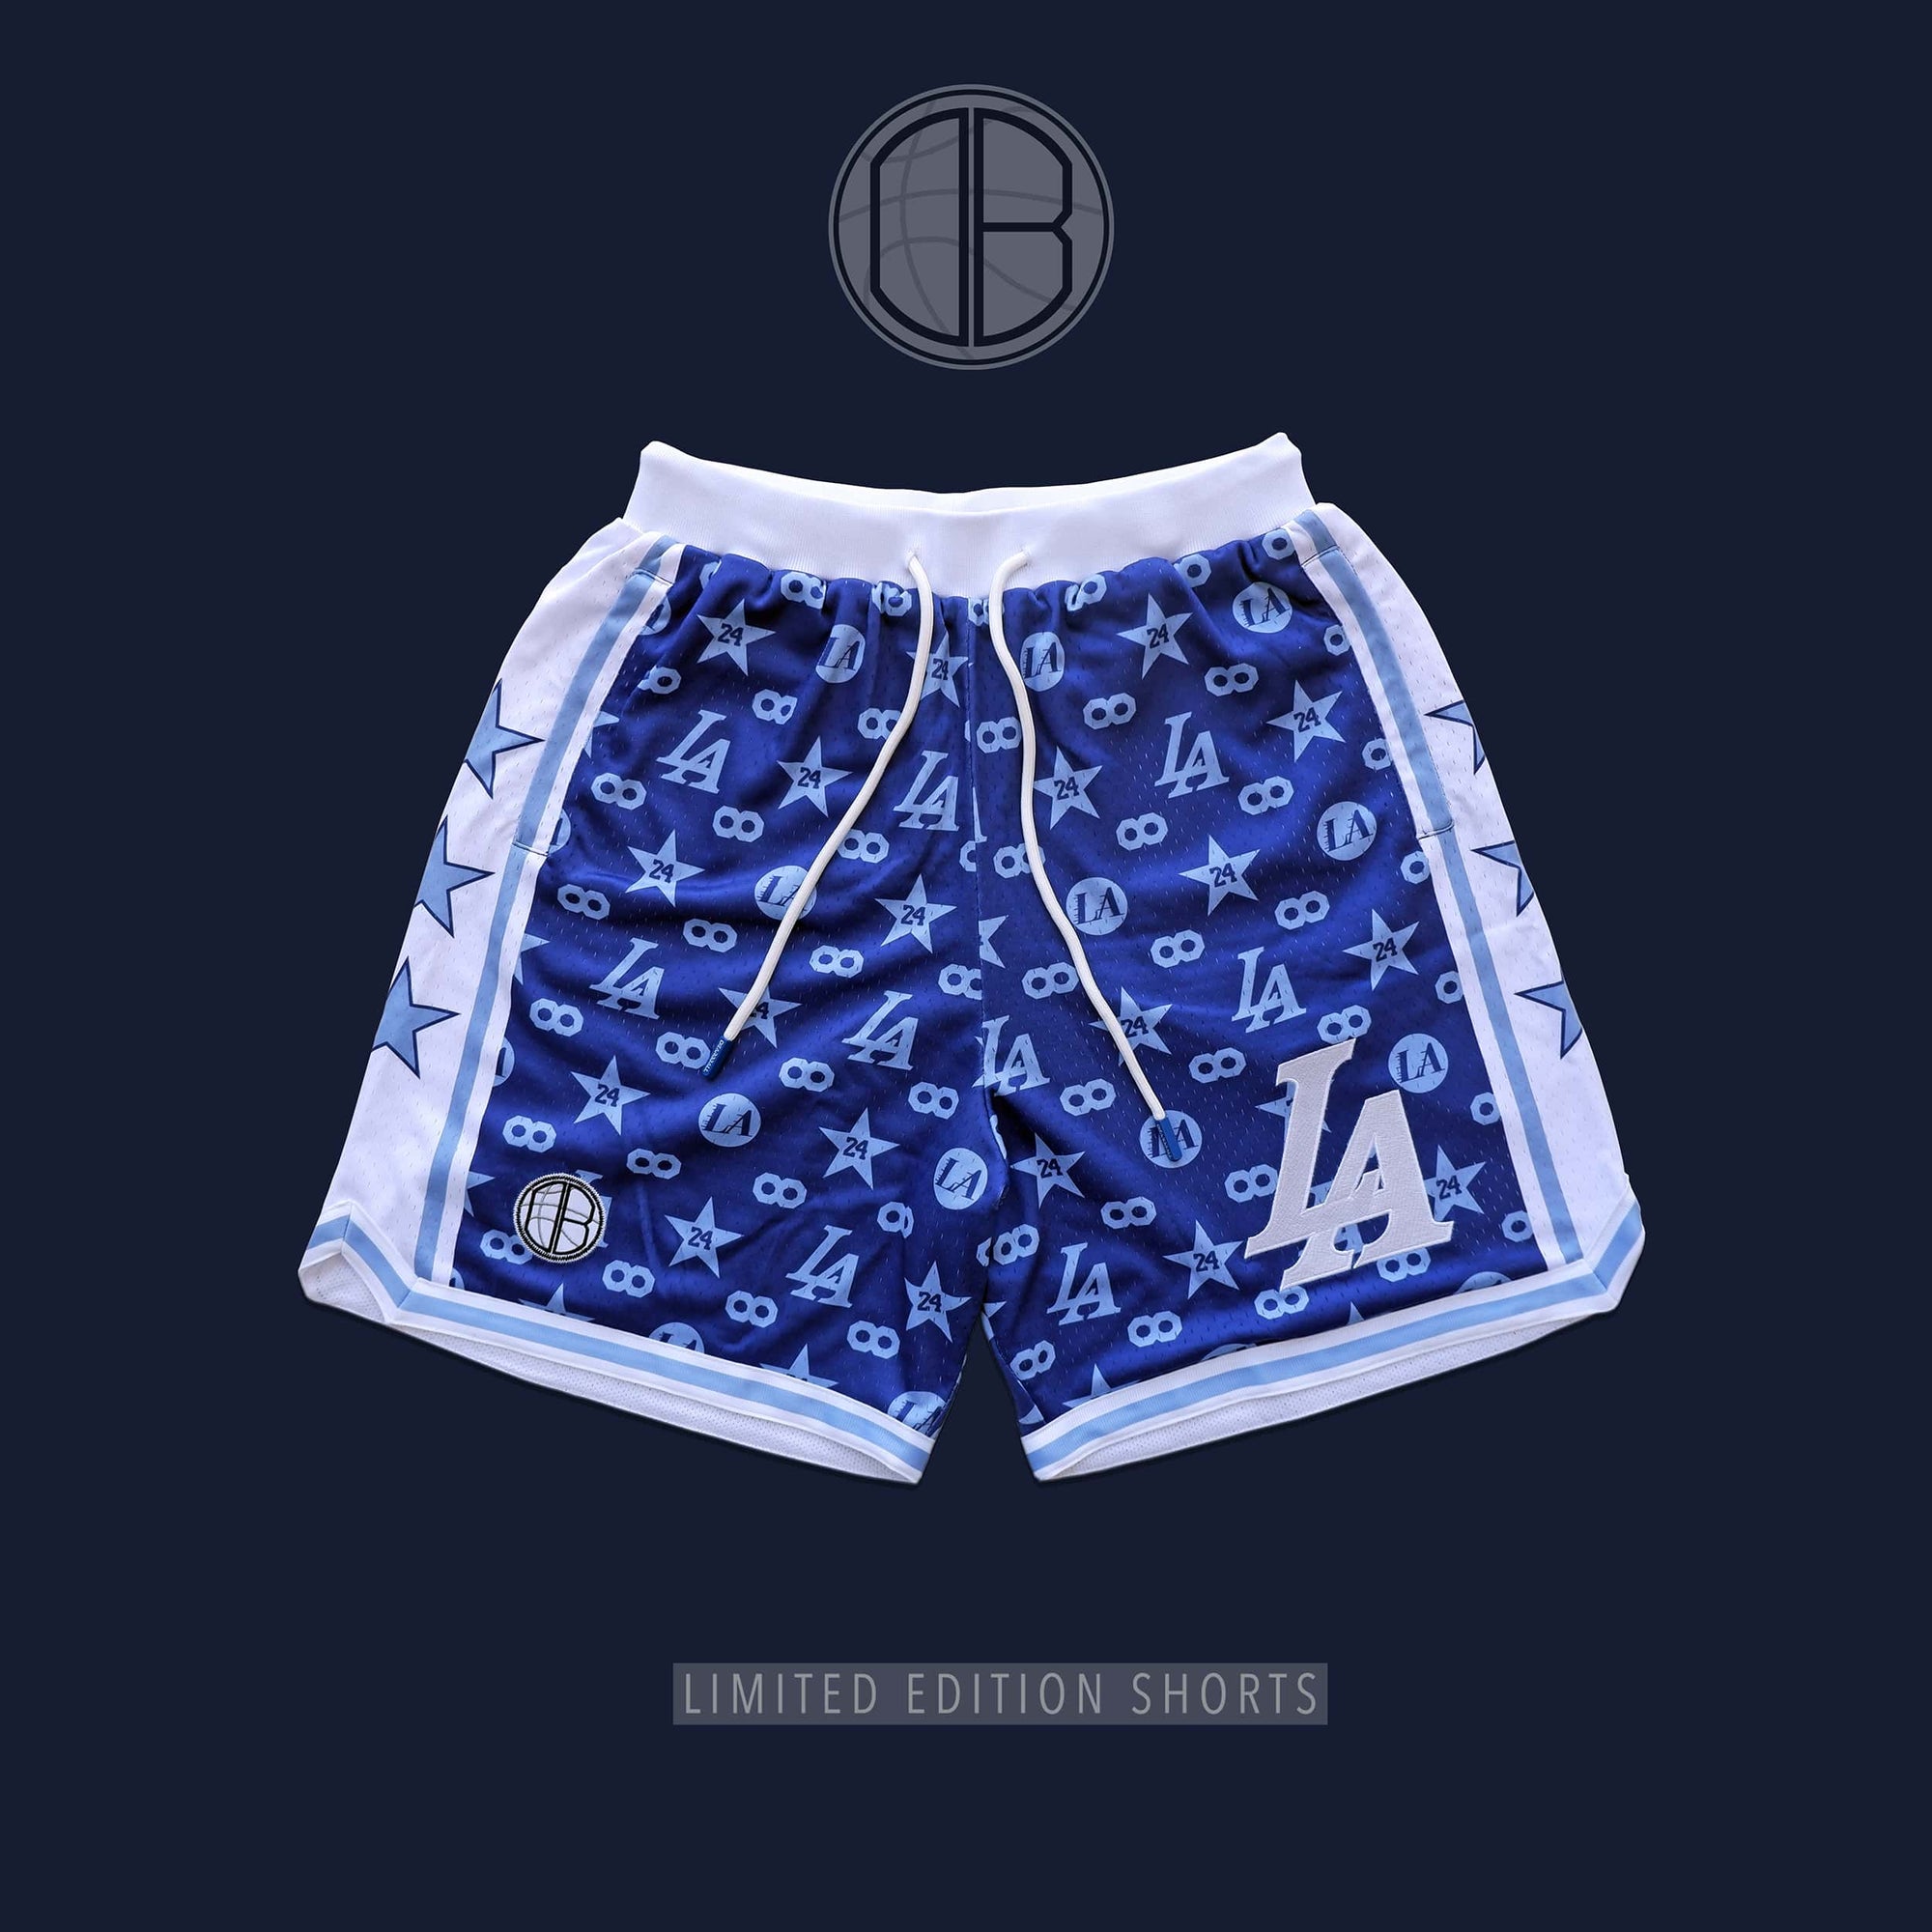 DEARBBALL SHORTS LOS ANGELES - LA 24 8 INFINITY LIMITED EDITION ♾️